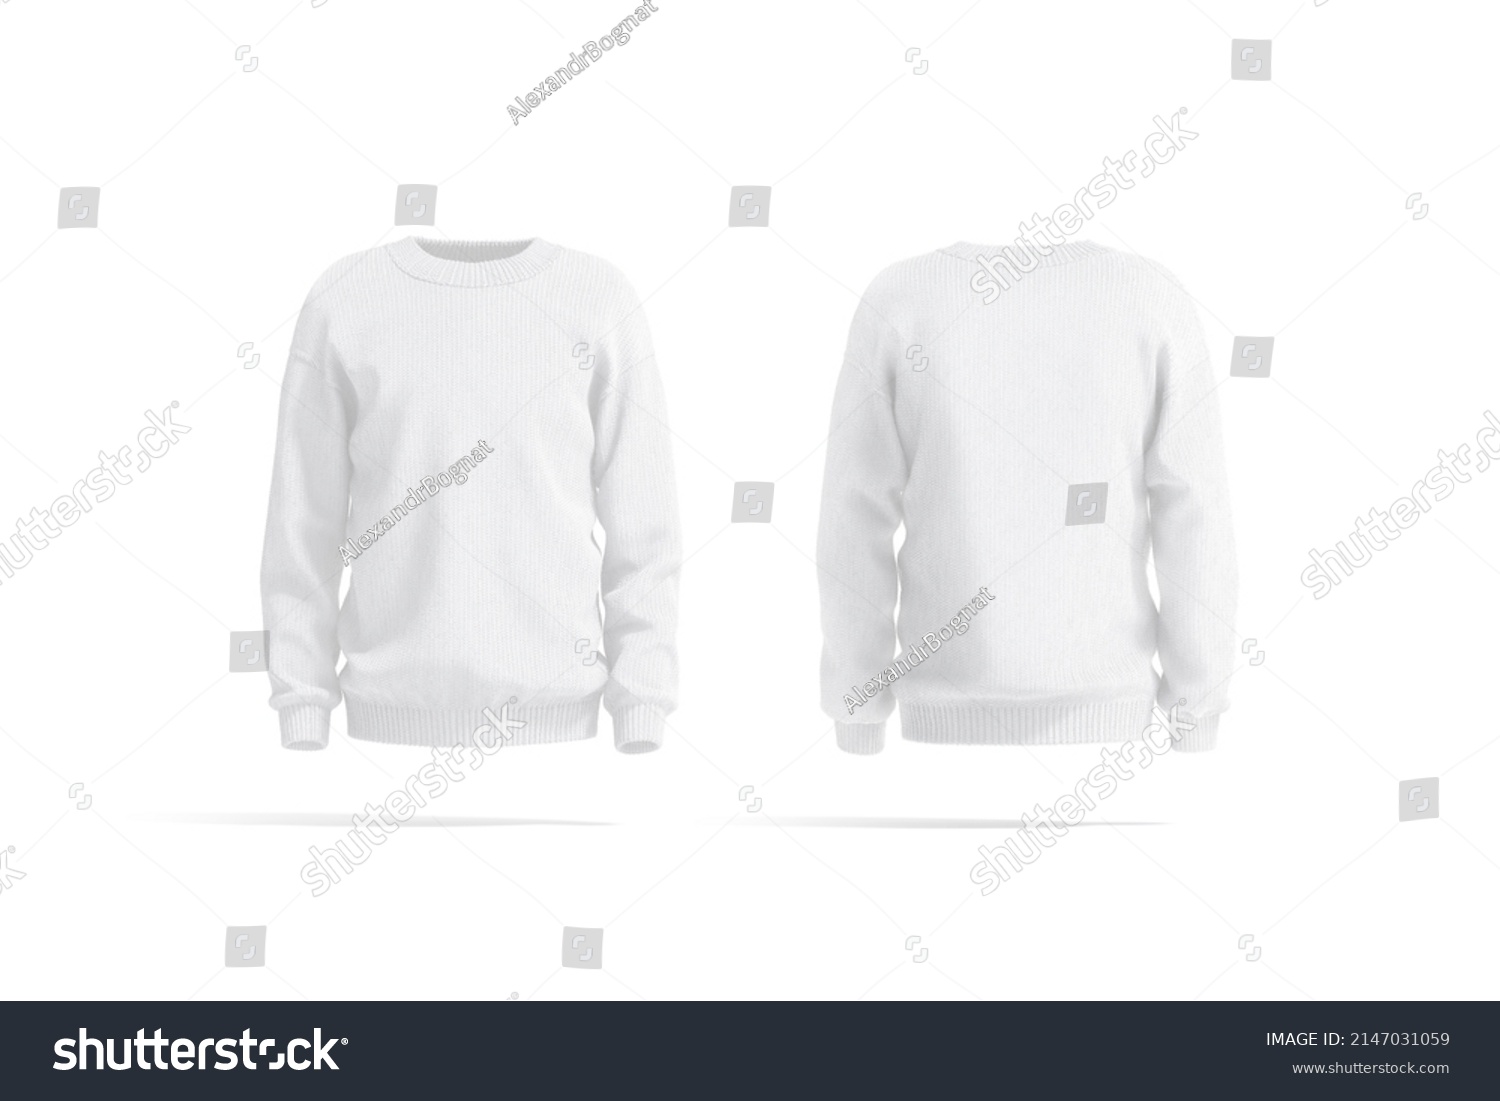 Blank White Knitted Sweater Mockup Front Stock Illustration 2147031059 ...